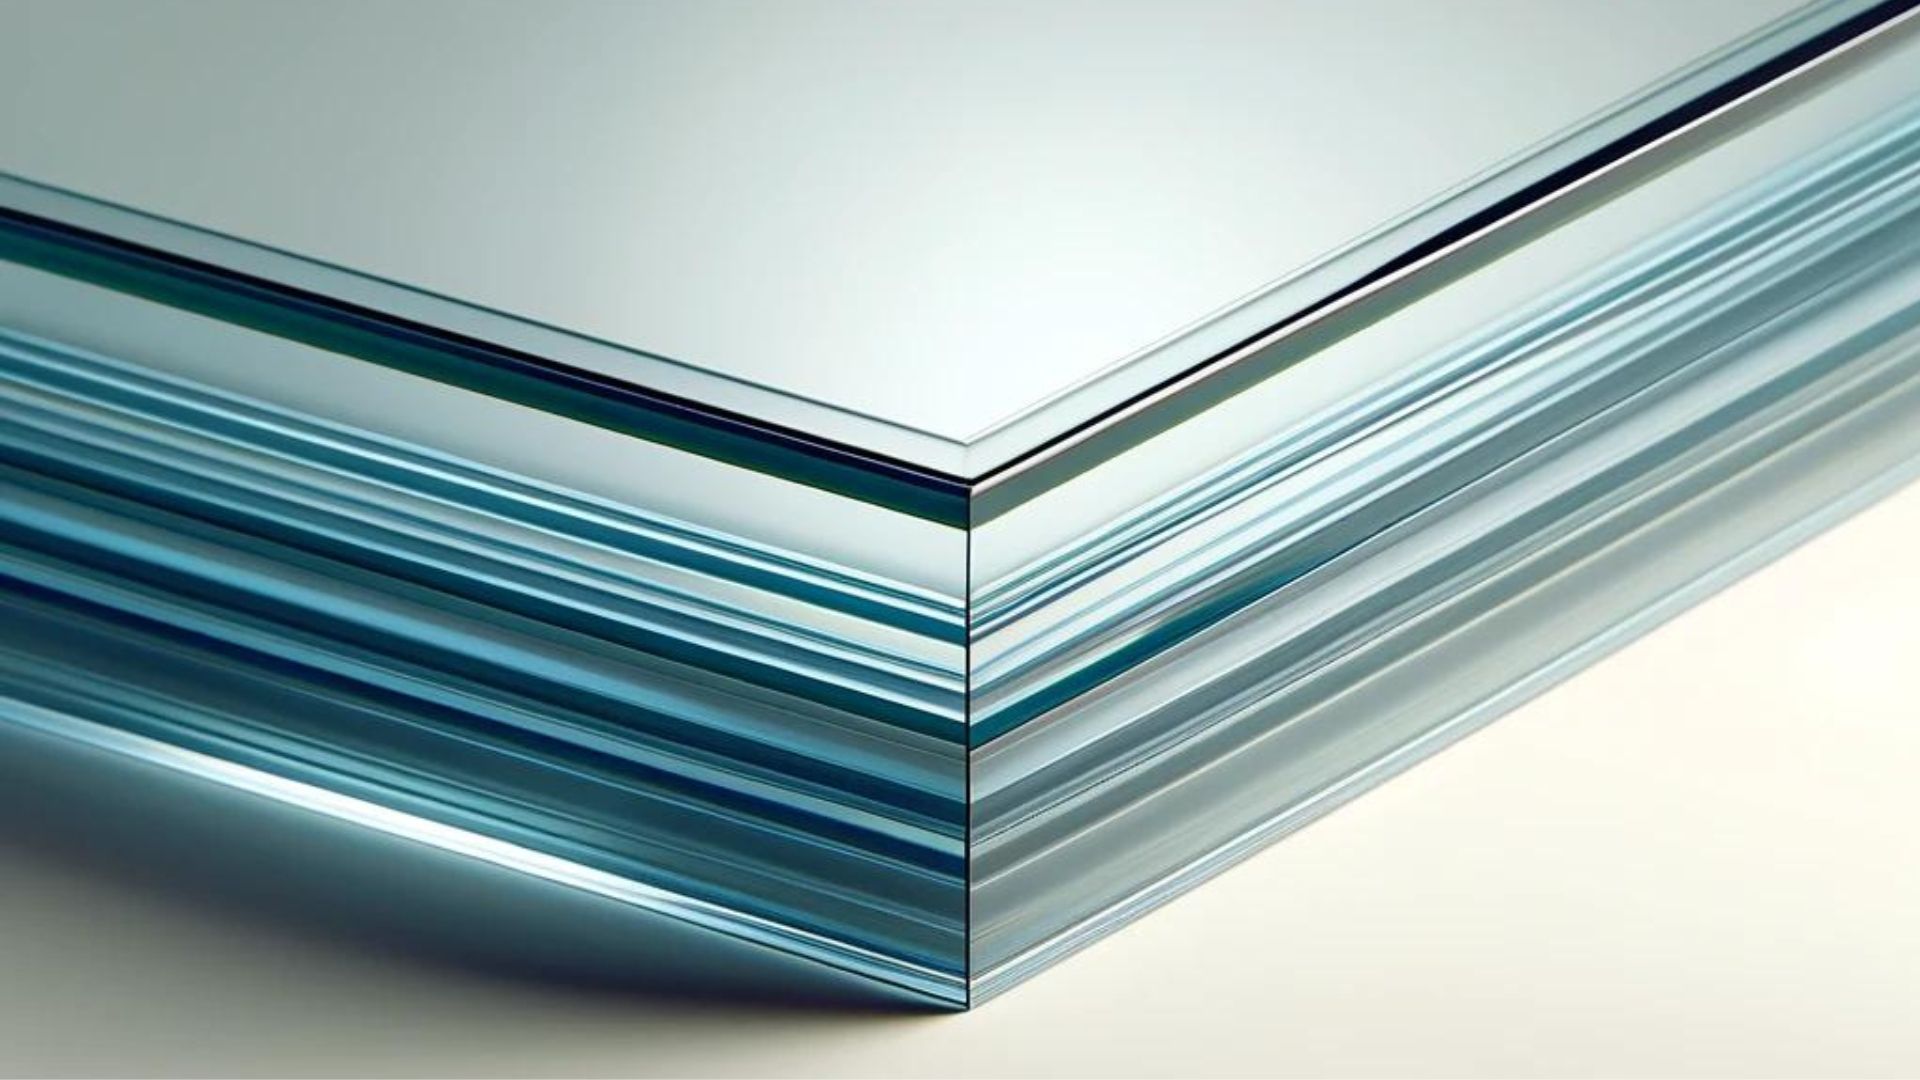 Laminated glass is used wherever extra safety is required. But how is it made? Find out in our guide